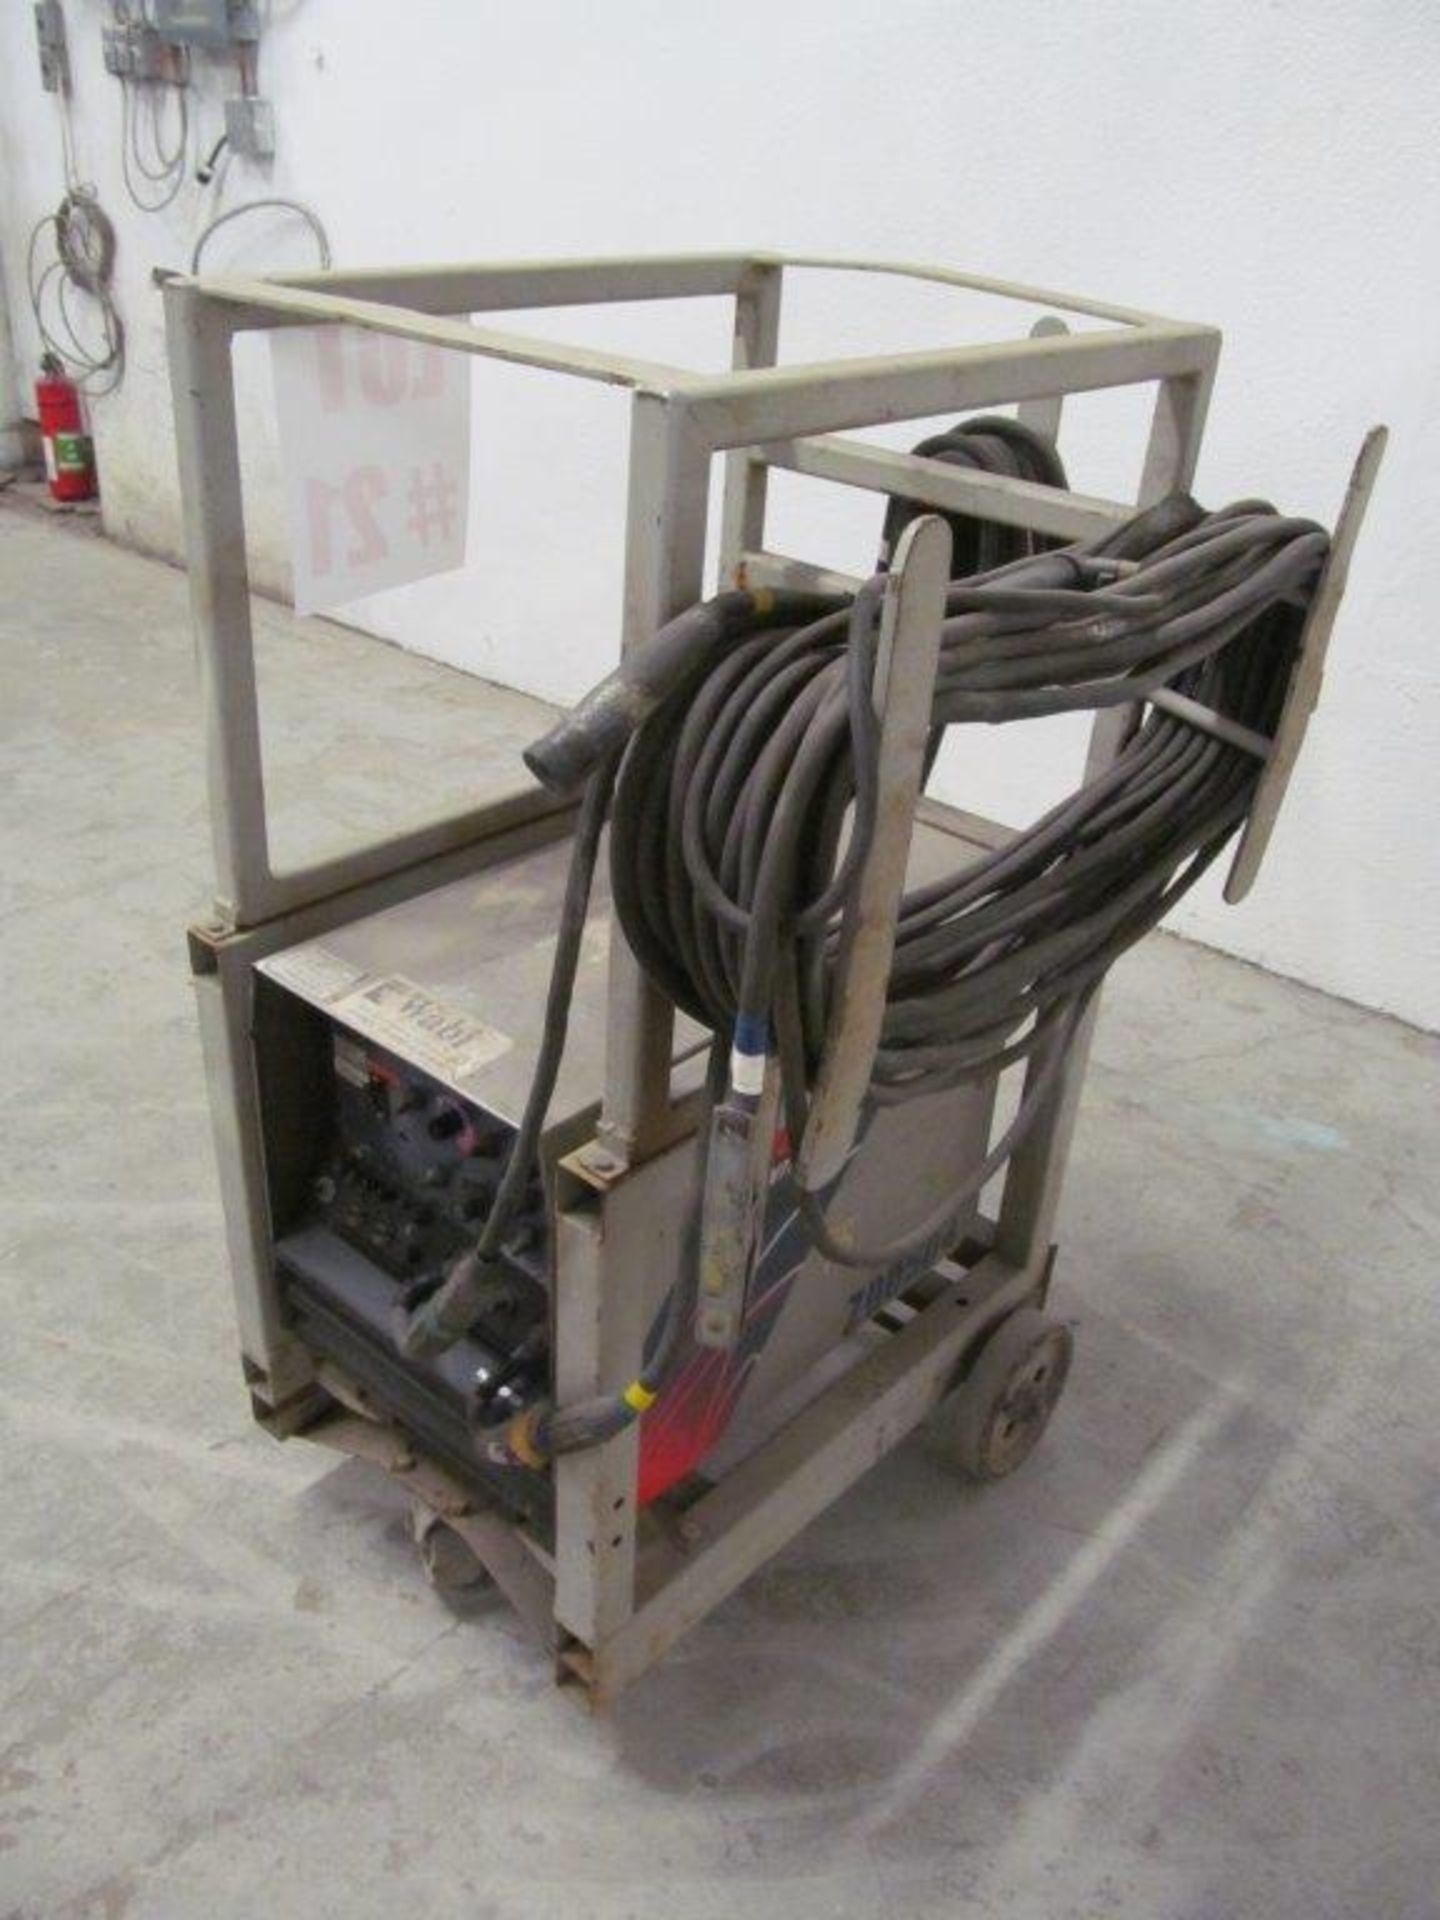 RED-D-ARC E300 3+2 CONTRACTOR WELDER, AC/DC 350 AMPS, ELECTRICS: 600V/3PH/60C - Image 2 of 4